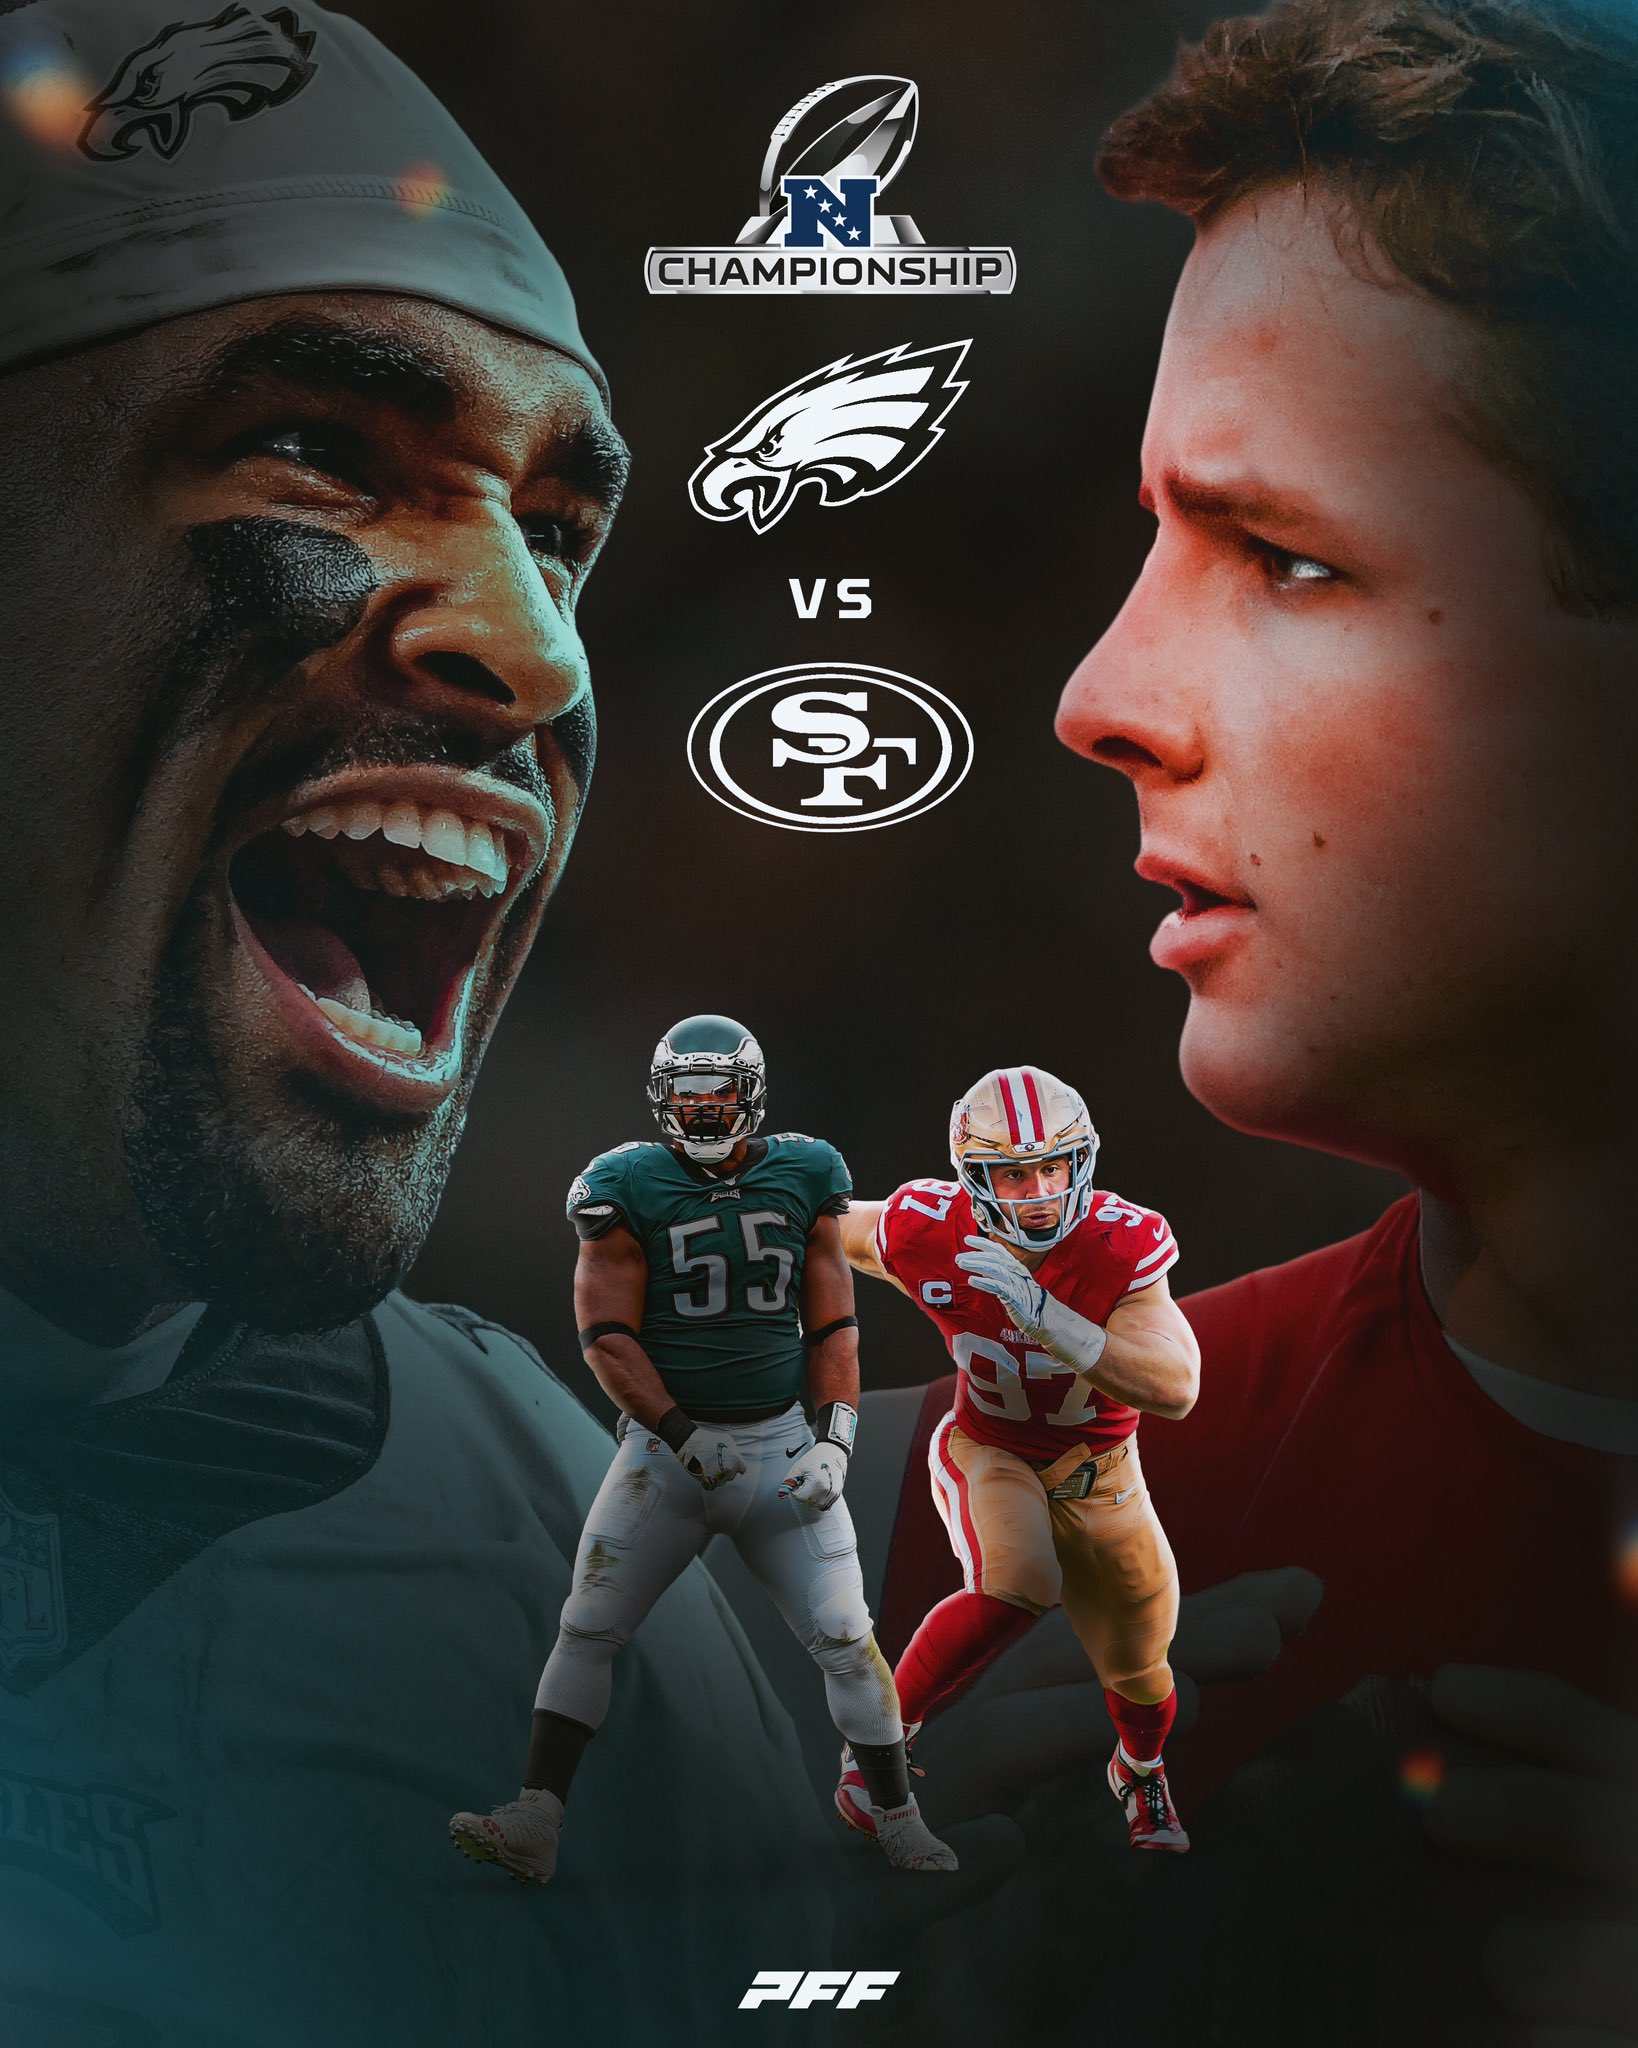 PFF on X: 'THE NFC CHAMPIONSHIP IS SET ‼️ EAGLES VS 49ERS 